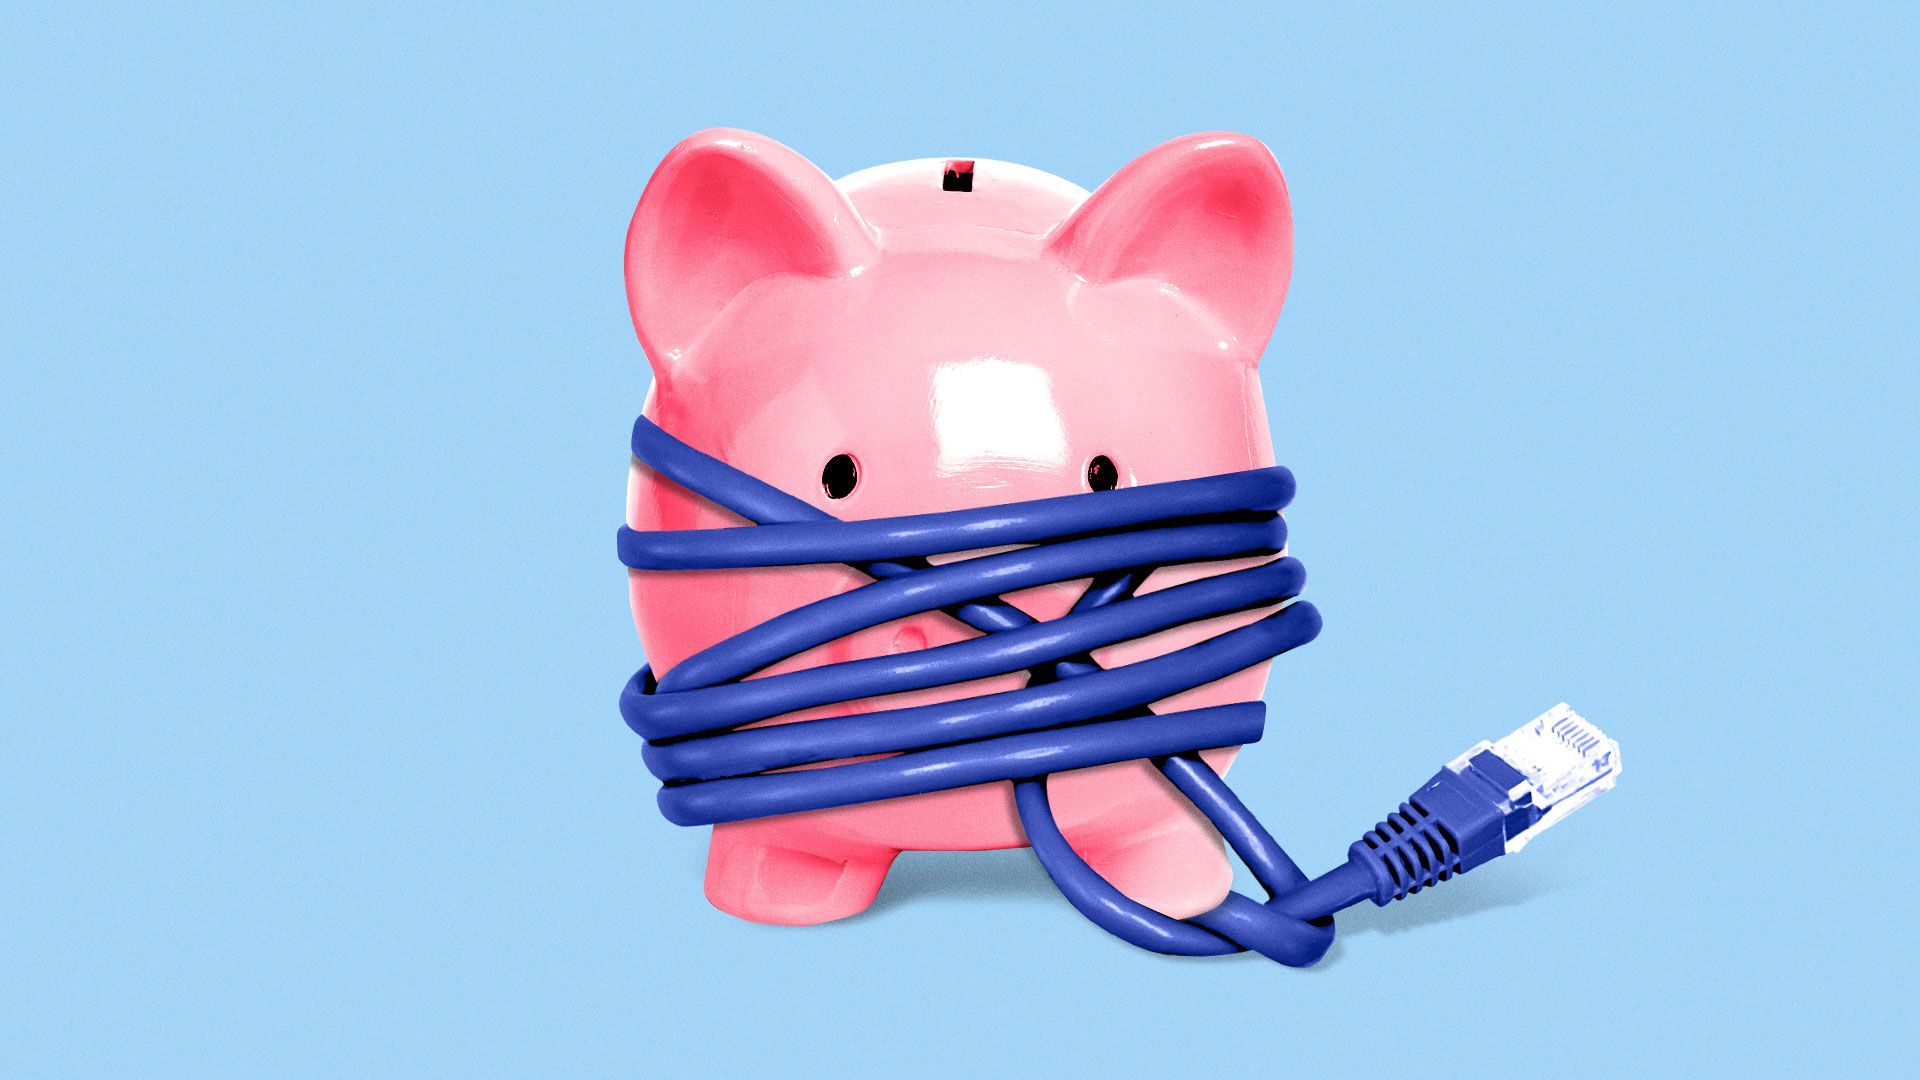 Illustration of piggy bank tied up in ethernet cable